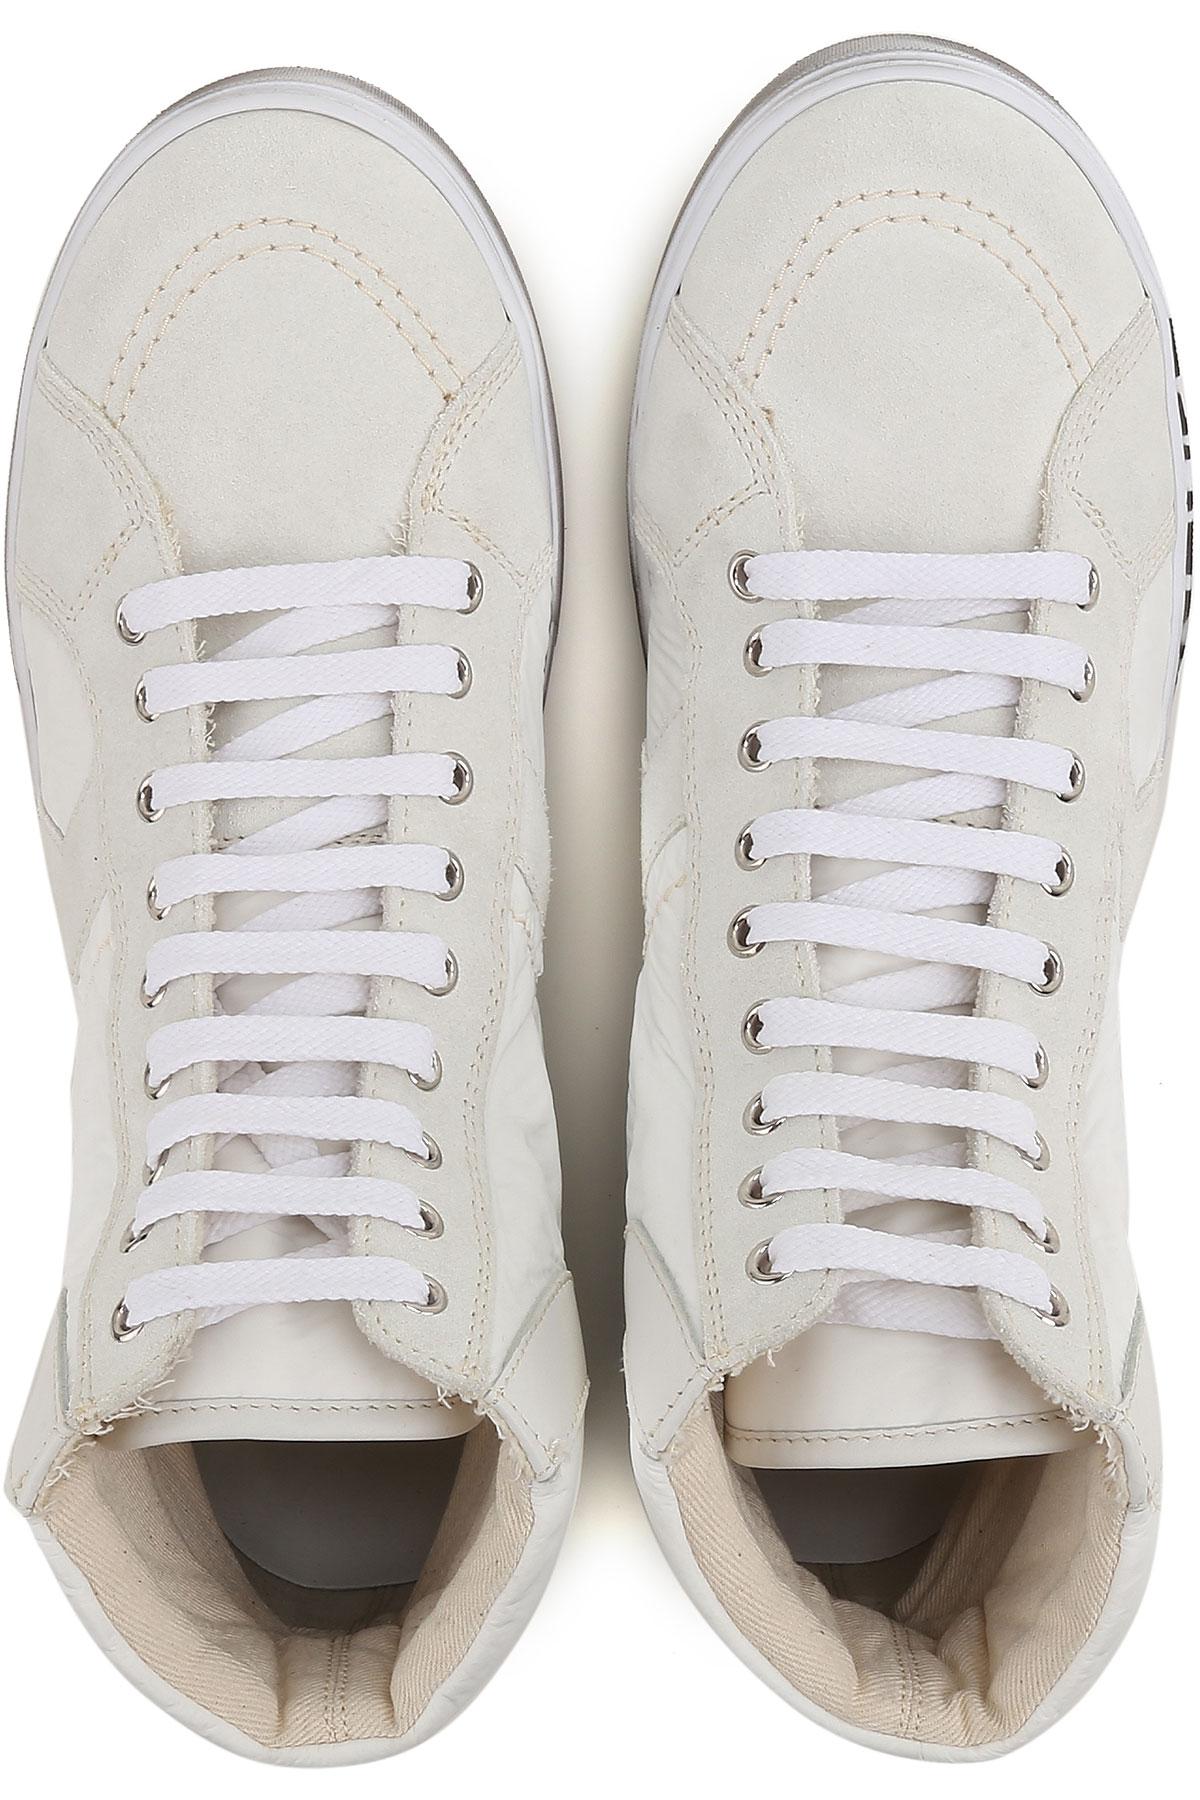 Saint Laurent Lace Sneakers For Men On Sale In Outlet in White for Men - Lyst